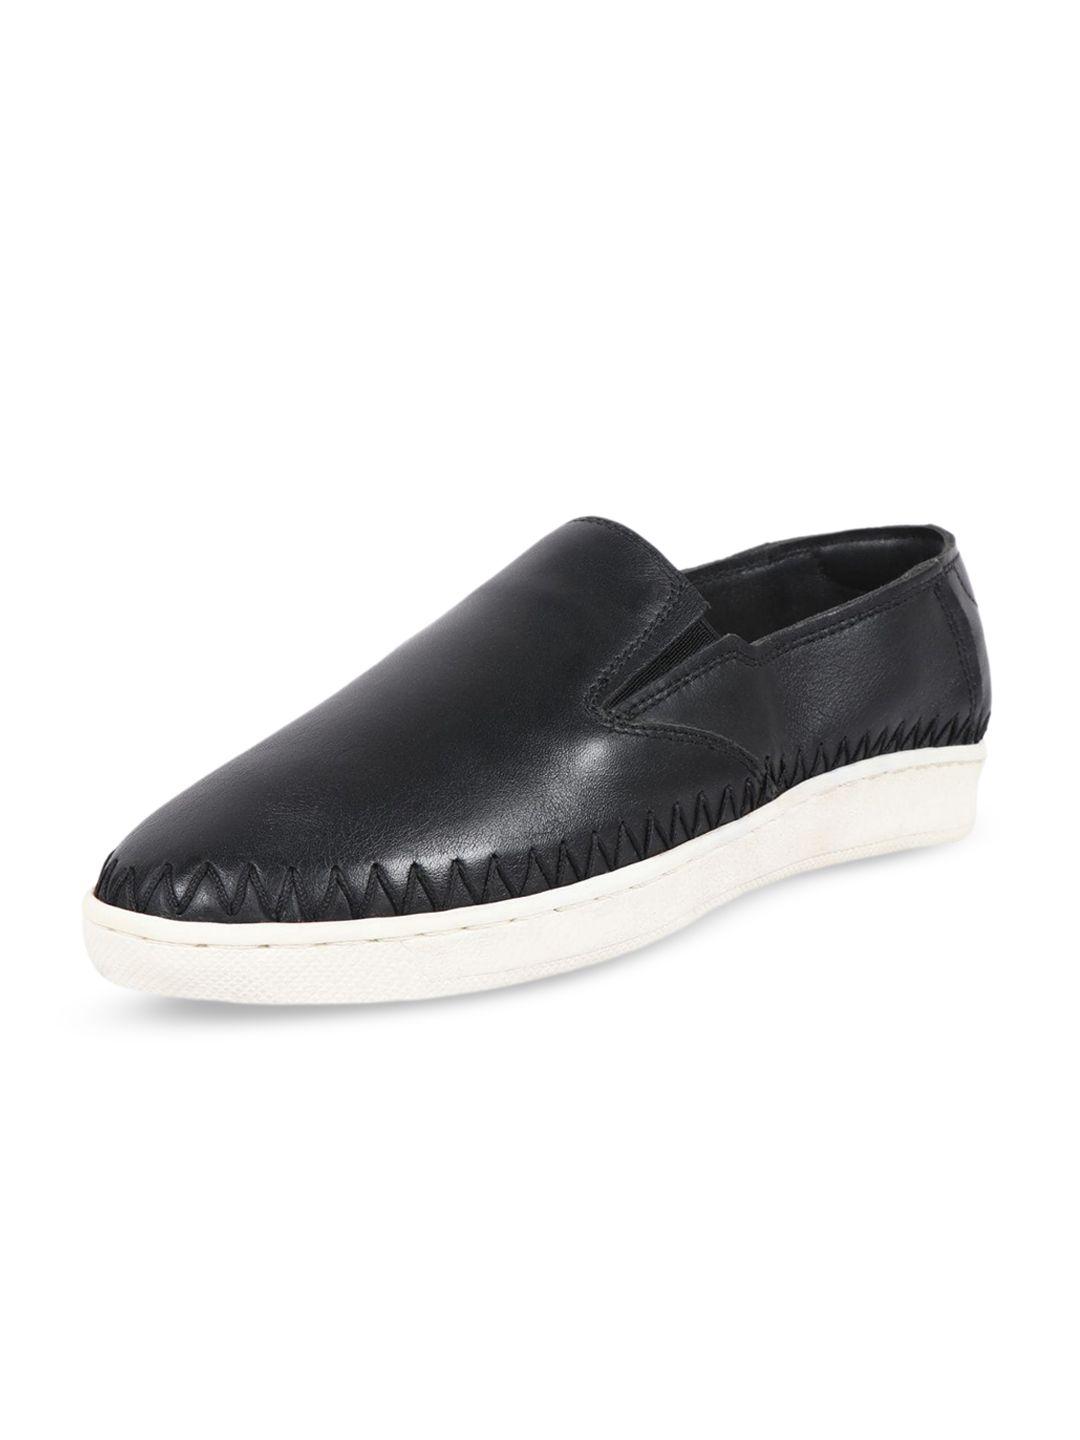 hidesign-women-k2-leather-comfort-insole-slip-on-sneakers